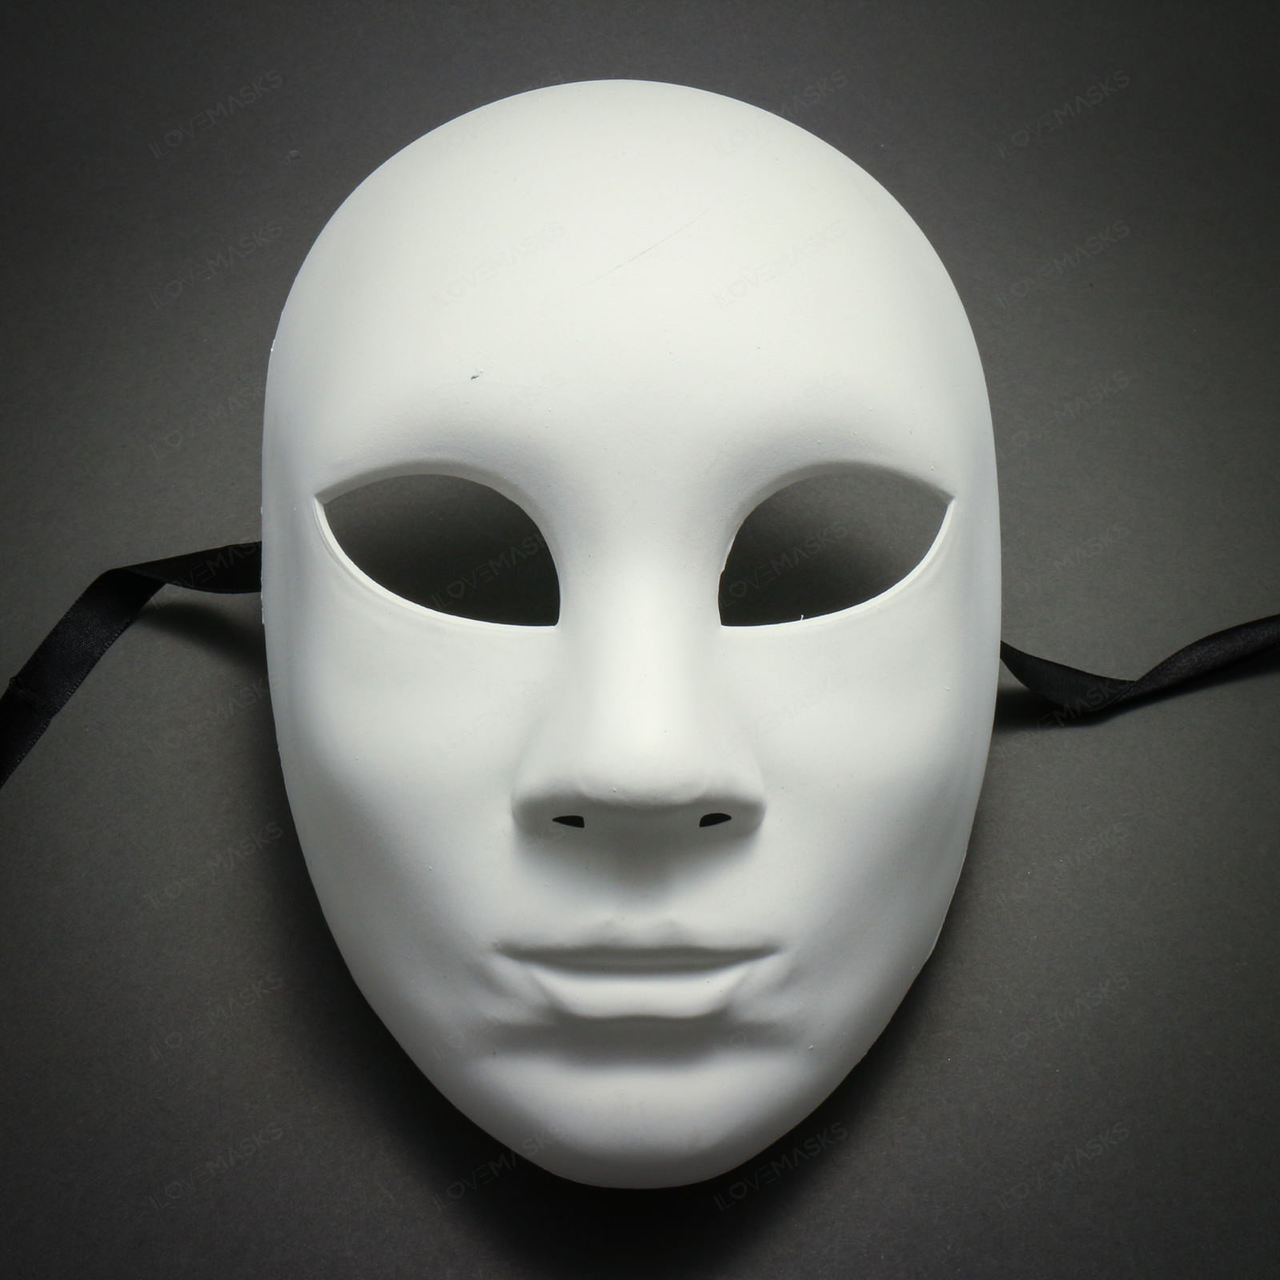 LMK Plain White Blank Decorating Craft Full Face Masquerade Mask Costome  Party